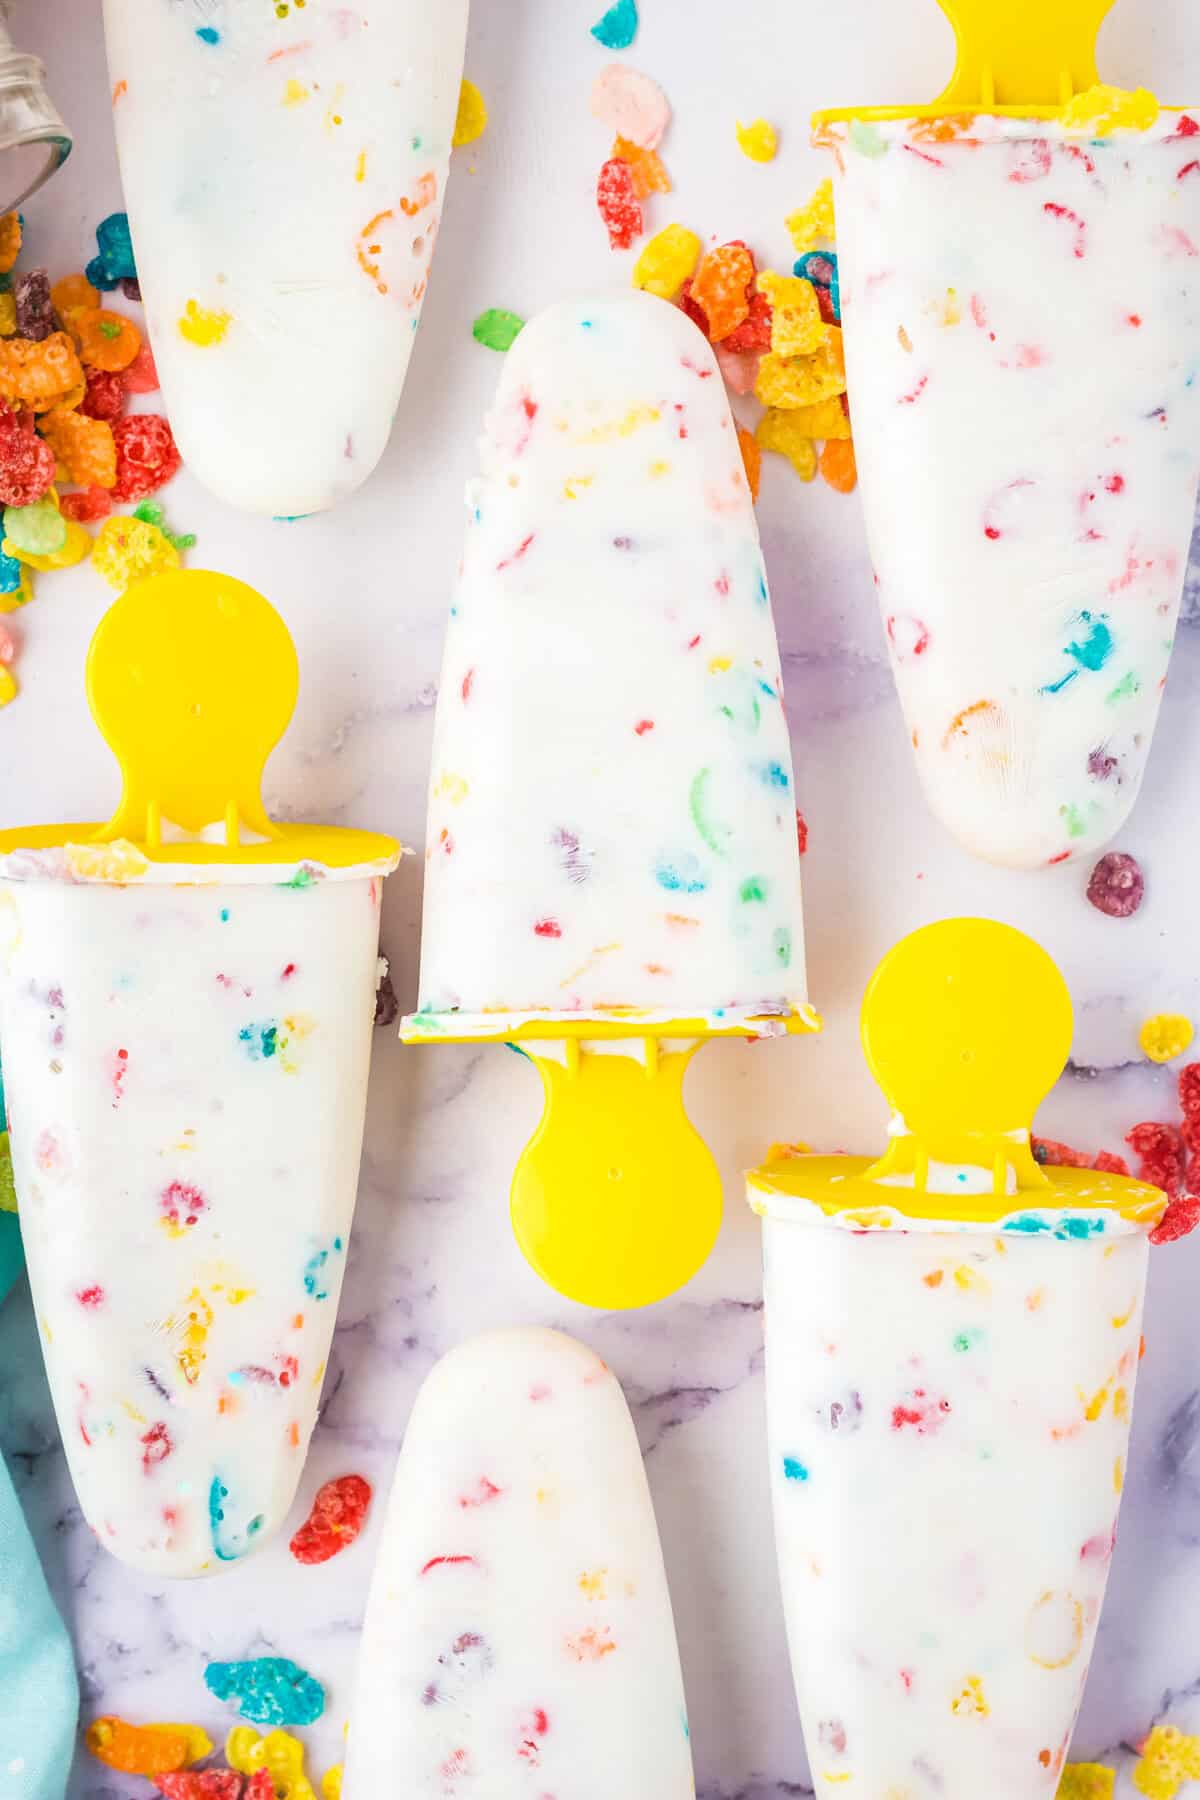 Homemade fruity Pebbles cereal Greek yogurt popsicles with yellow handles. The colorful cereal can be seen throughout the white ice pops.